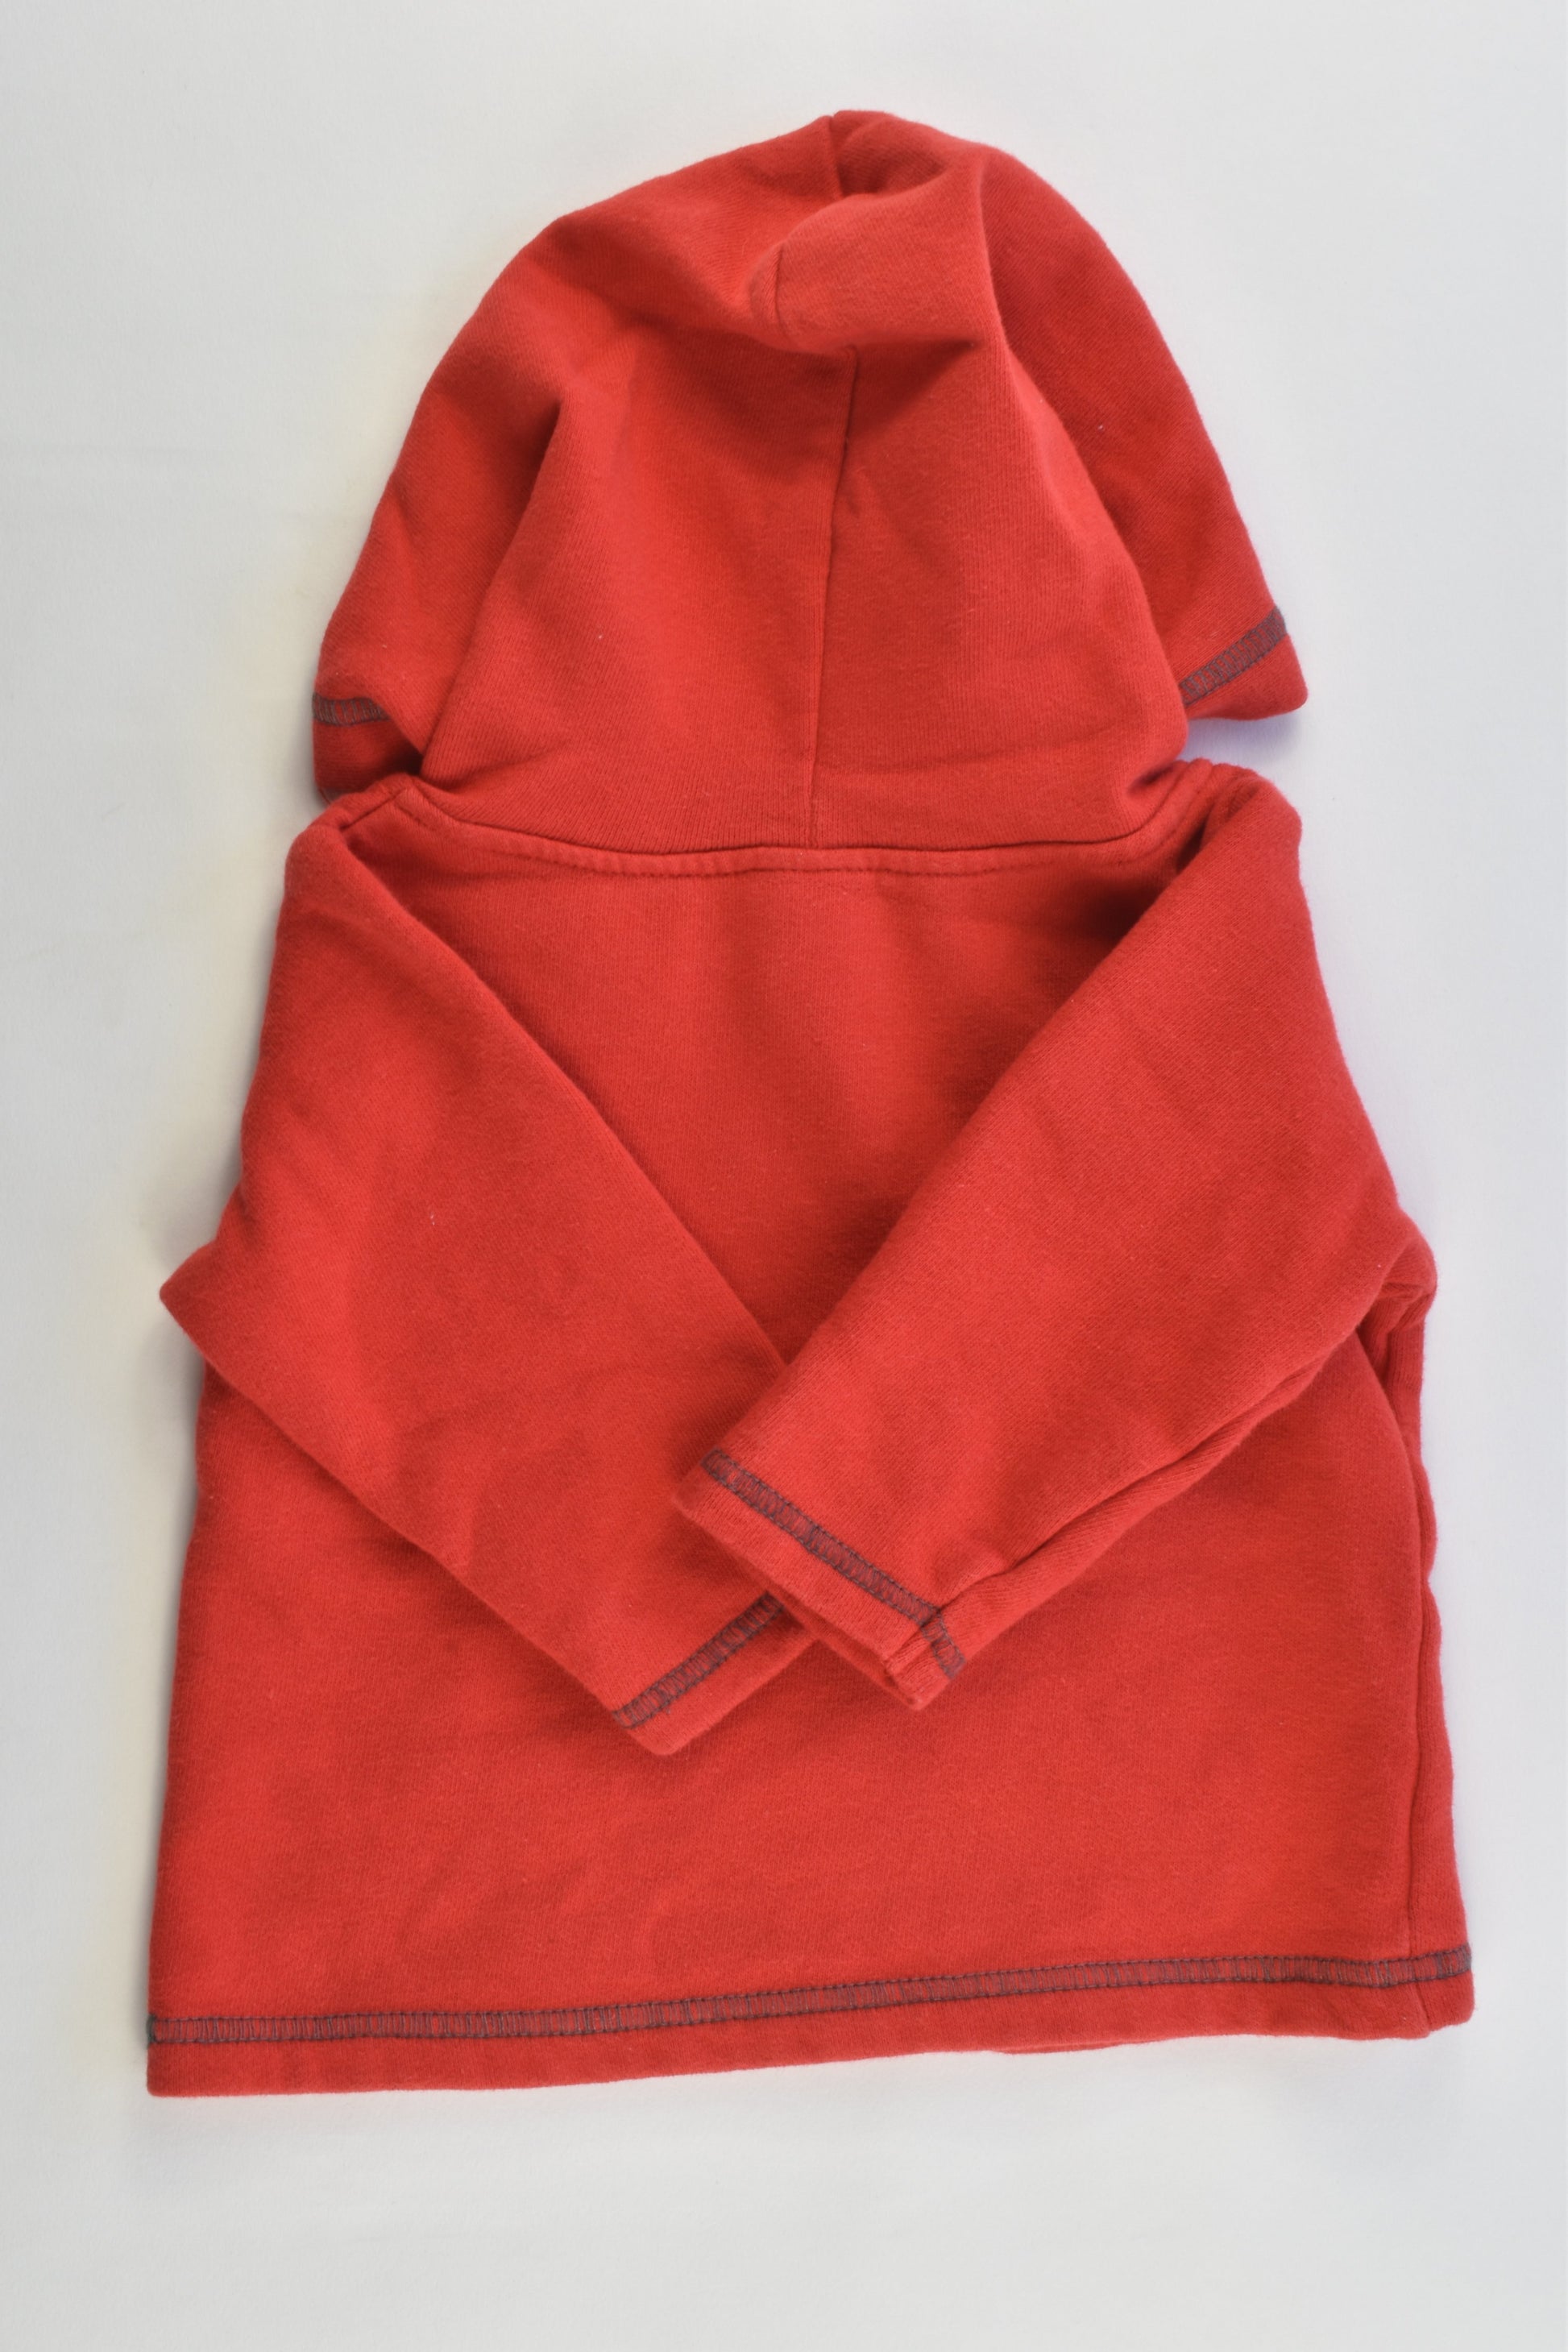 Ollie's Place Size 00 (3-6 months) Vehicles Hooded Jumper